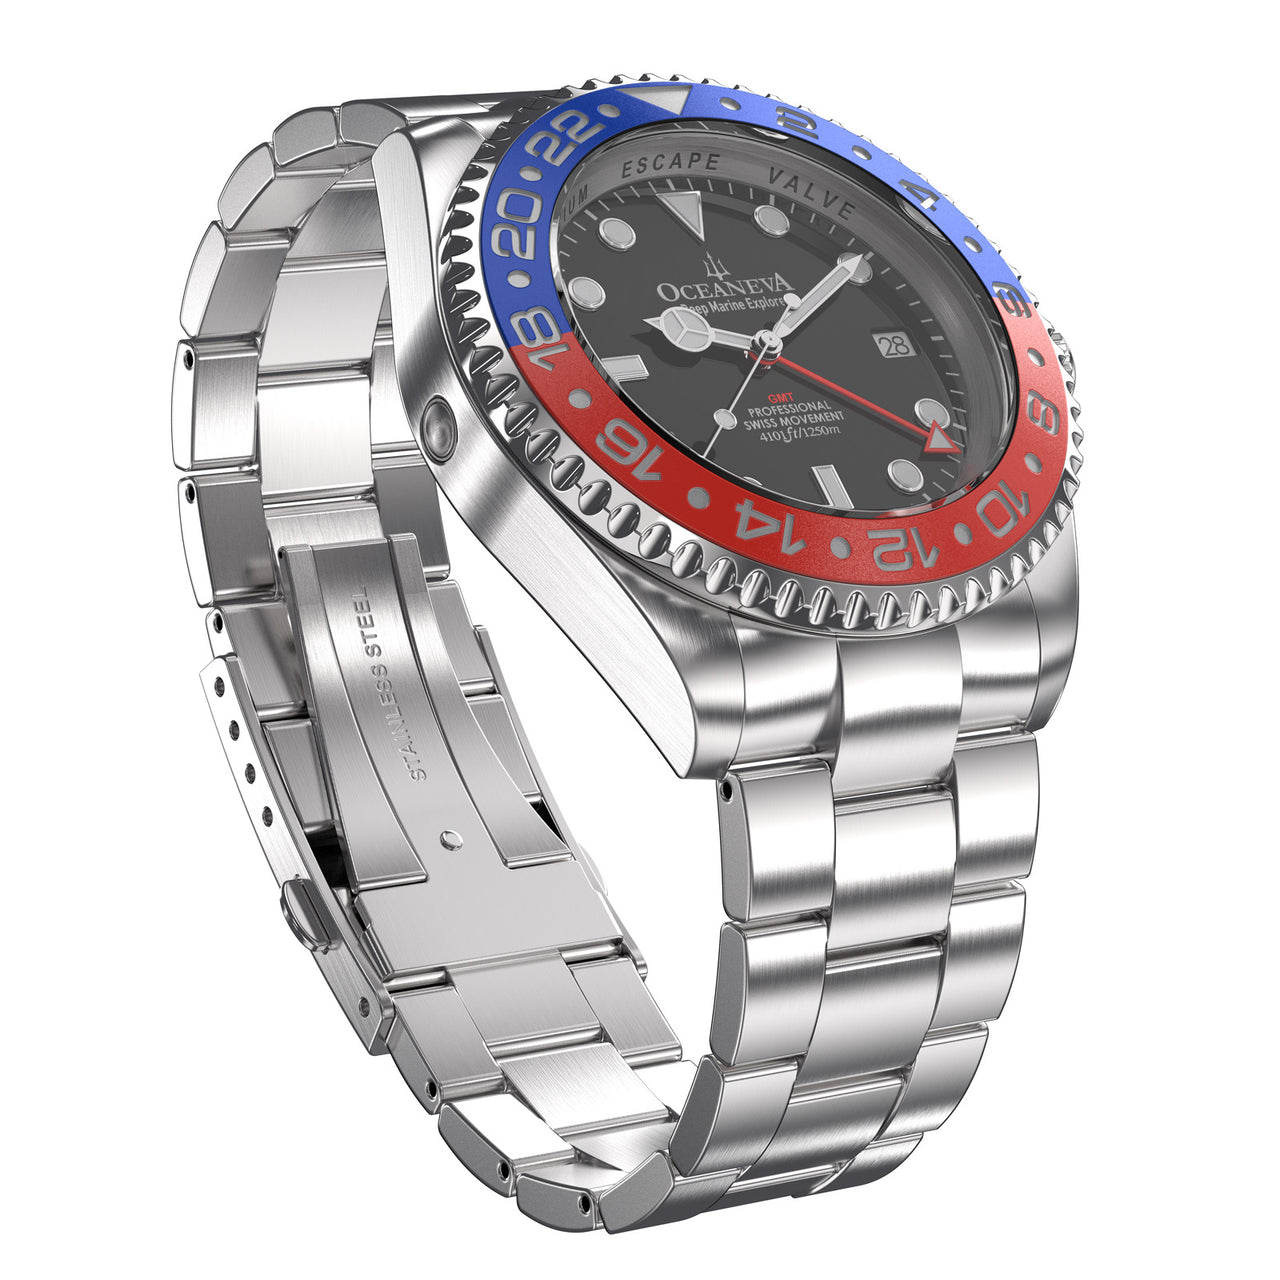 Oceaneva 1250M GMT Dive Watch Blue And Red Front Picture Slight Right Slant View